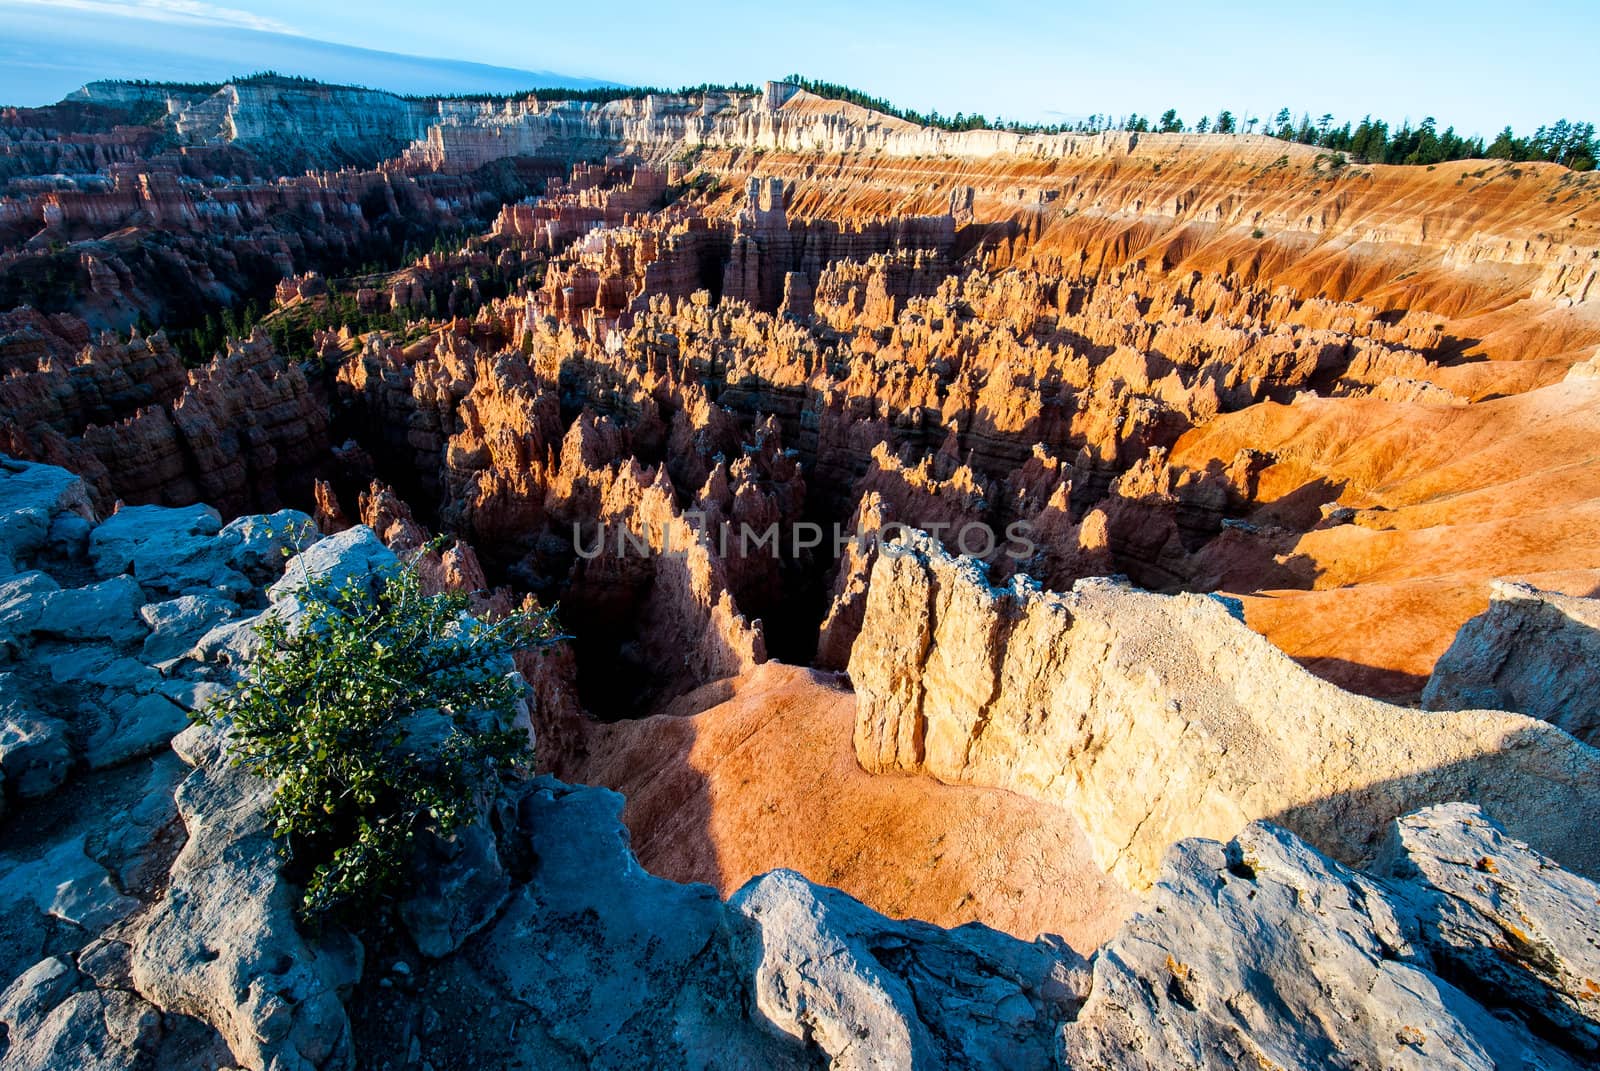 Bryce Canyon National Park at Sunrise by oliverjw